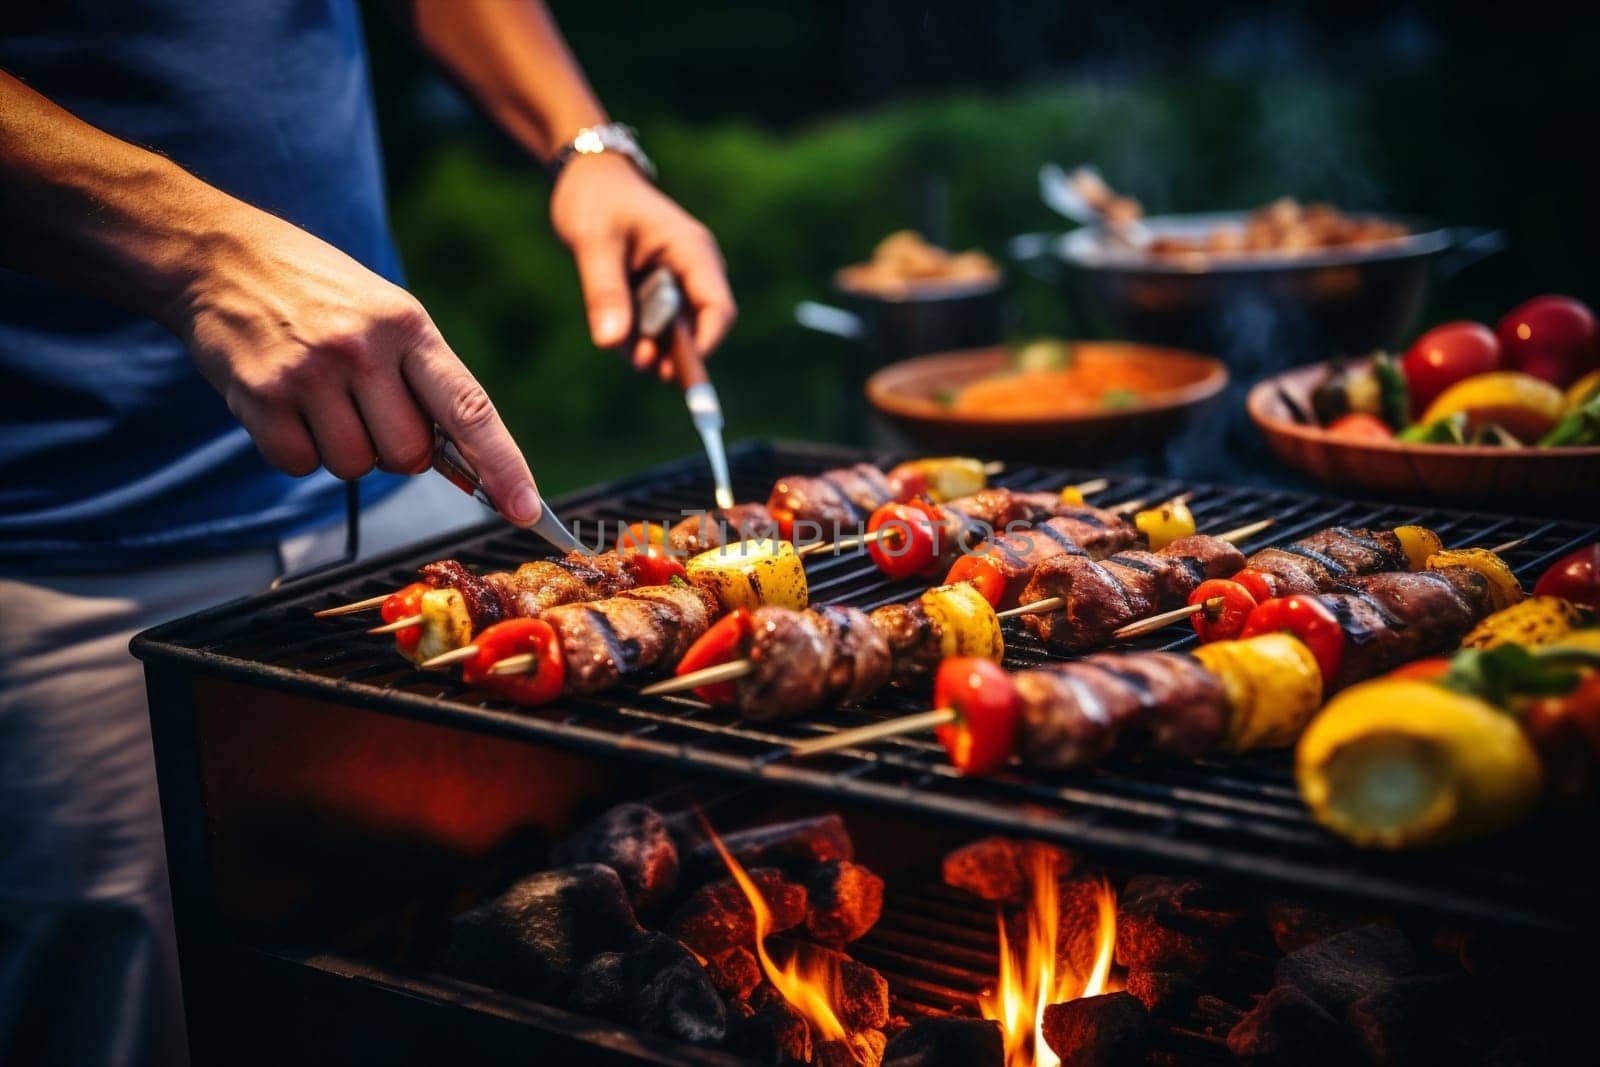 Fire cook barbecue vegetable food summer bbq meal lunch meat garden beef dinner roast hot picnic grill charcoal party delicious outdoors